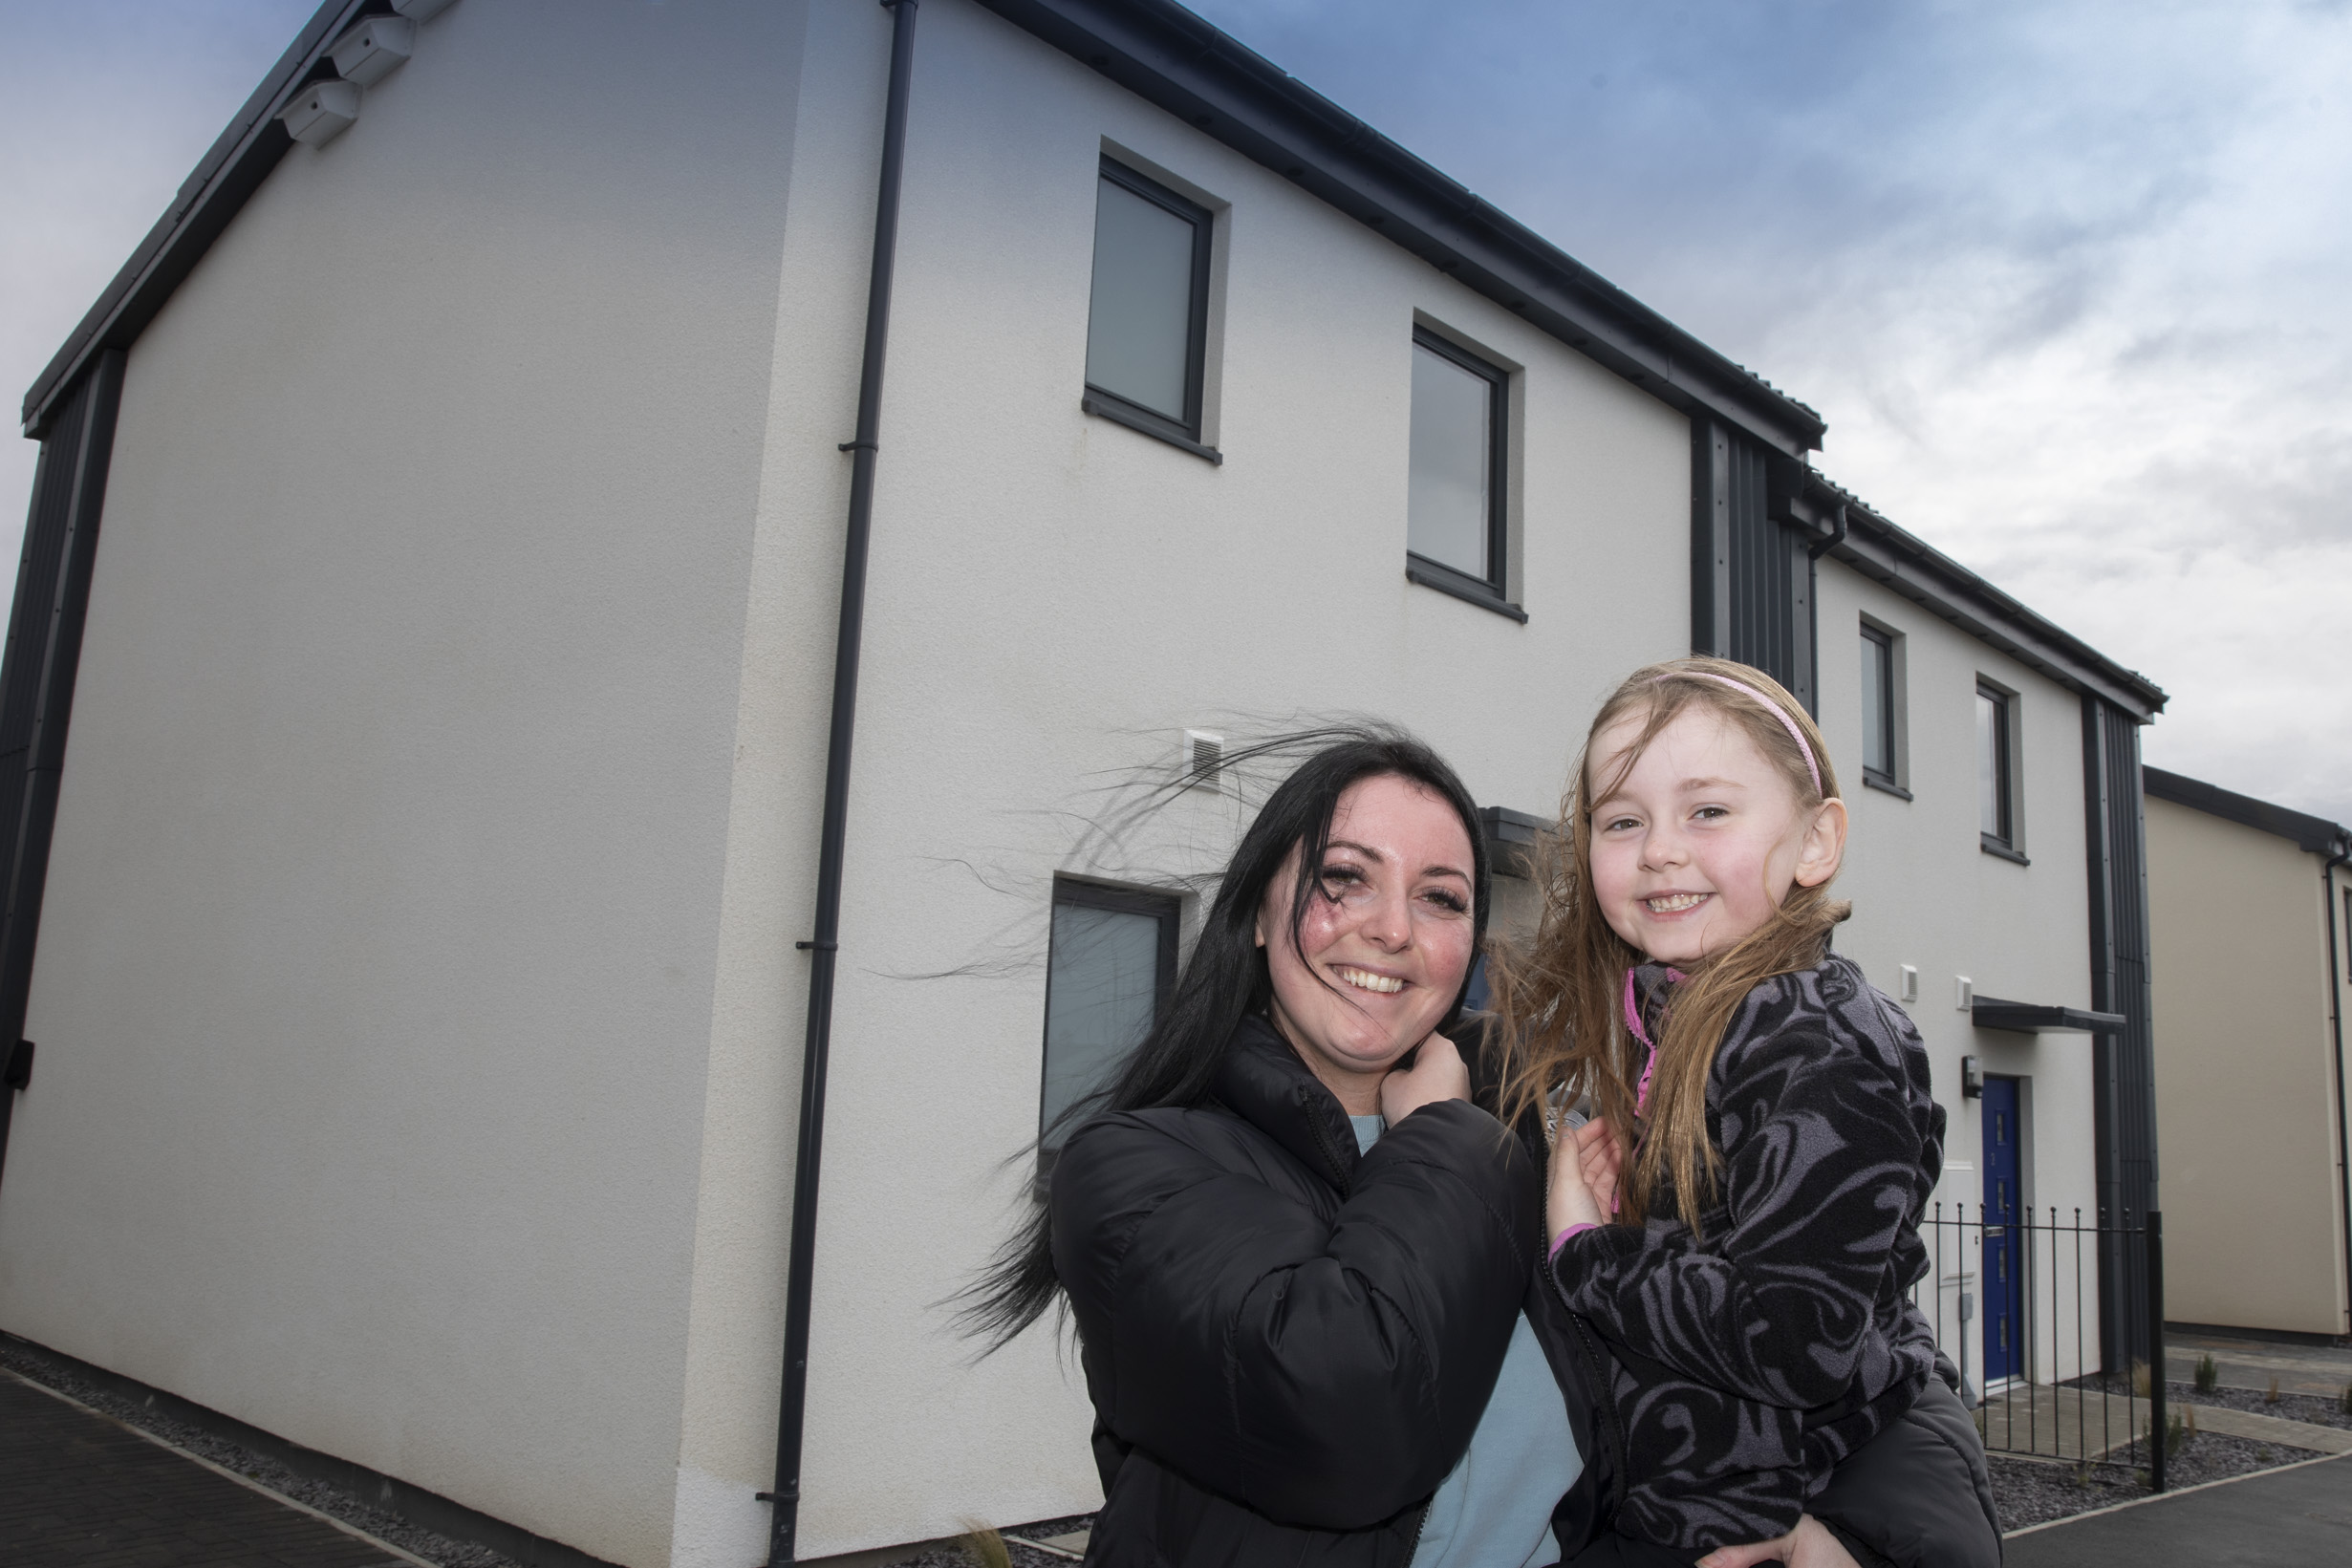 Eco-Friendly Housing Development in Wales Welcomes First Residents